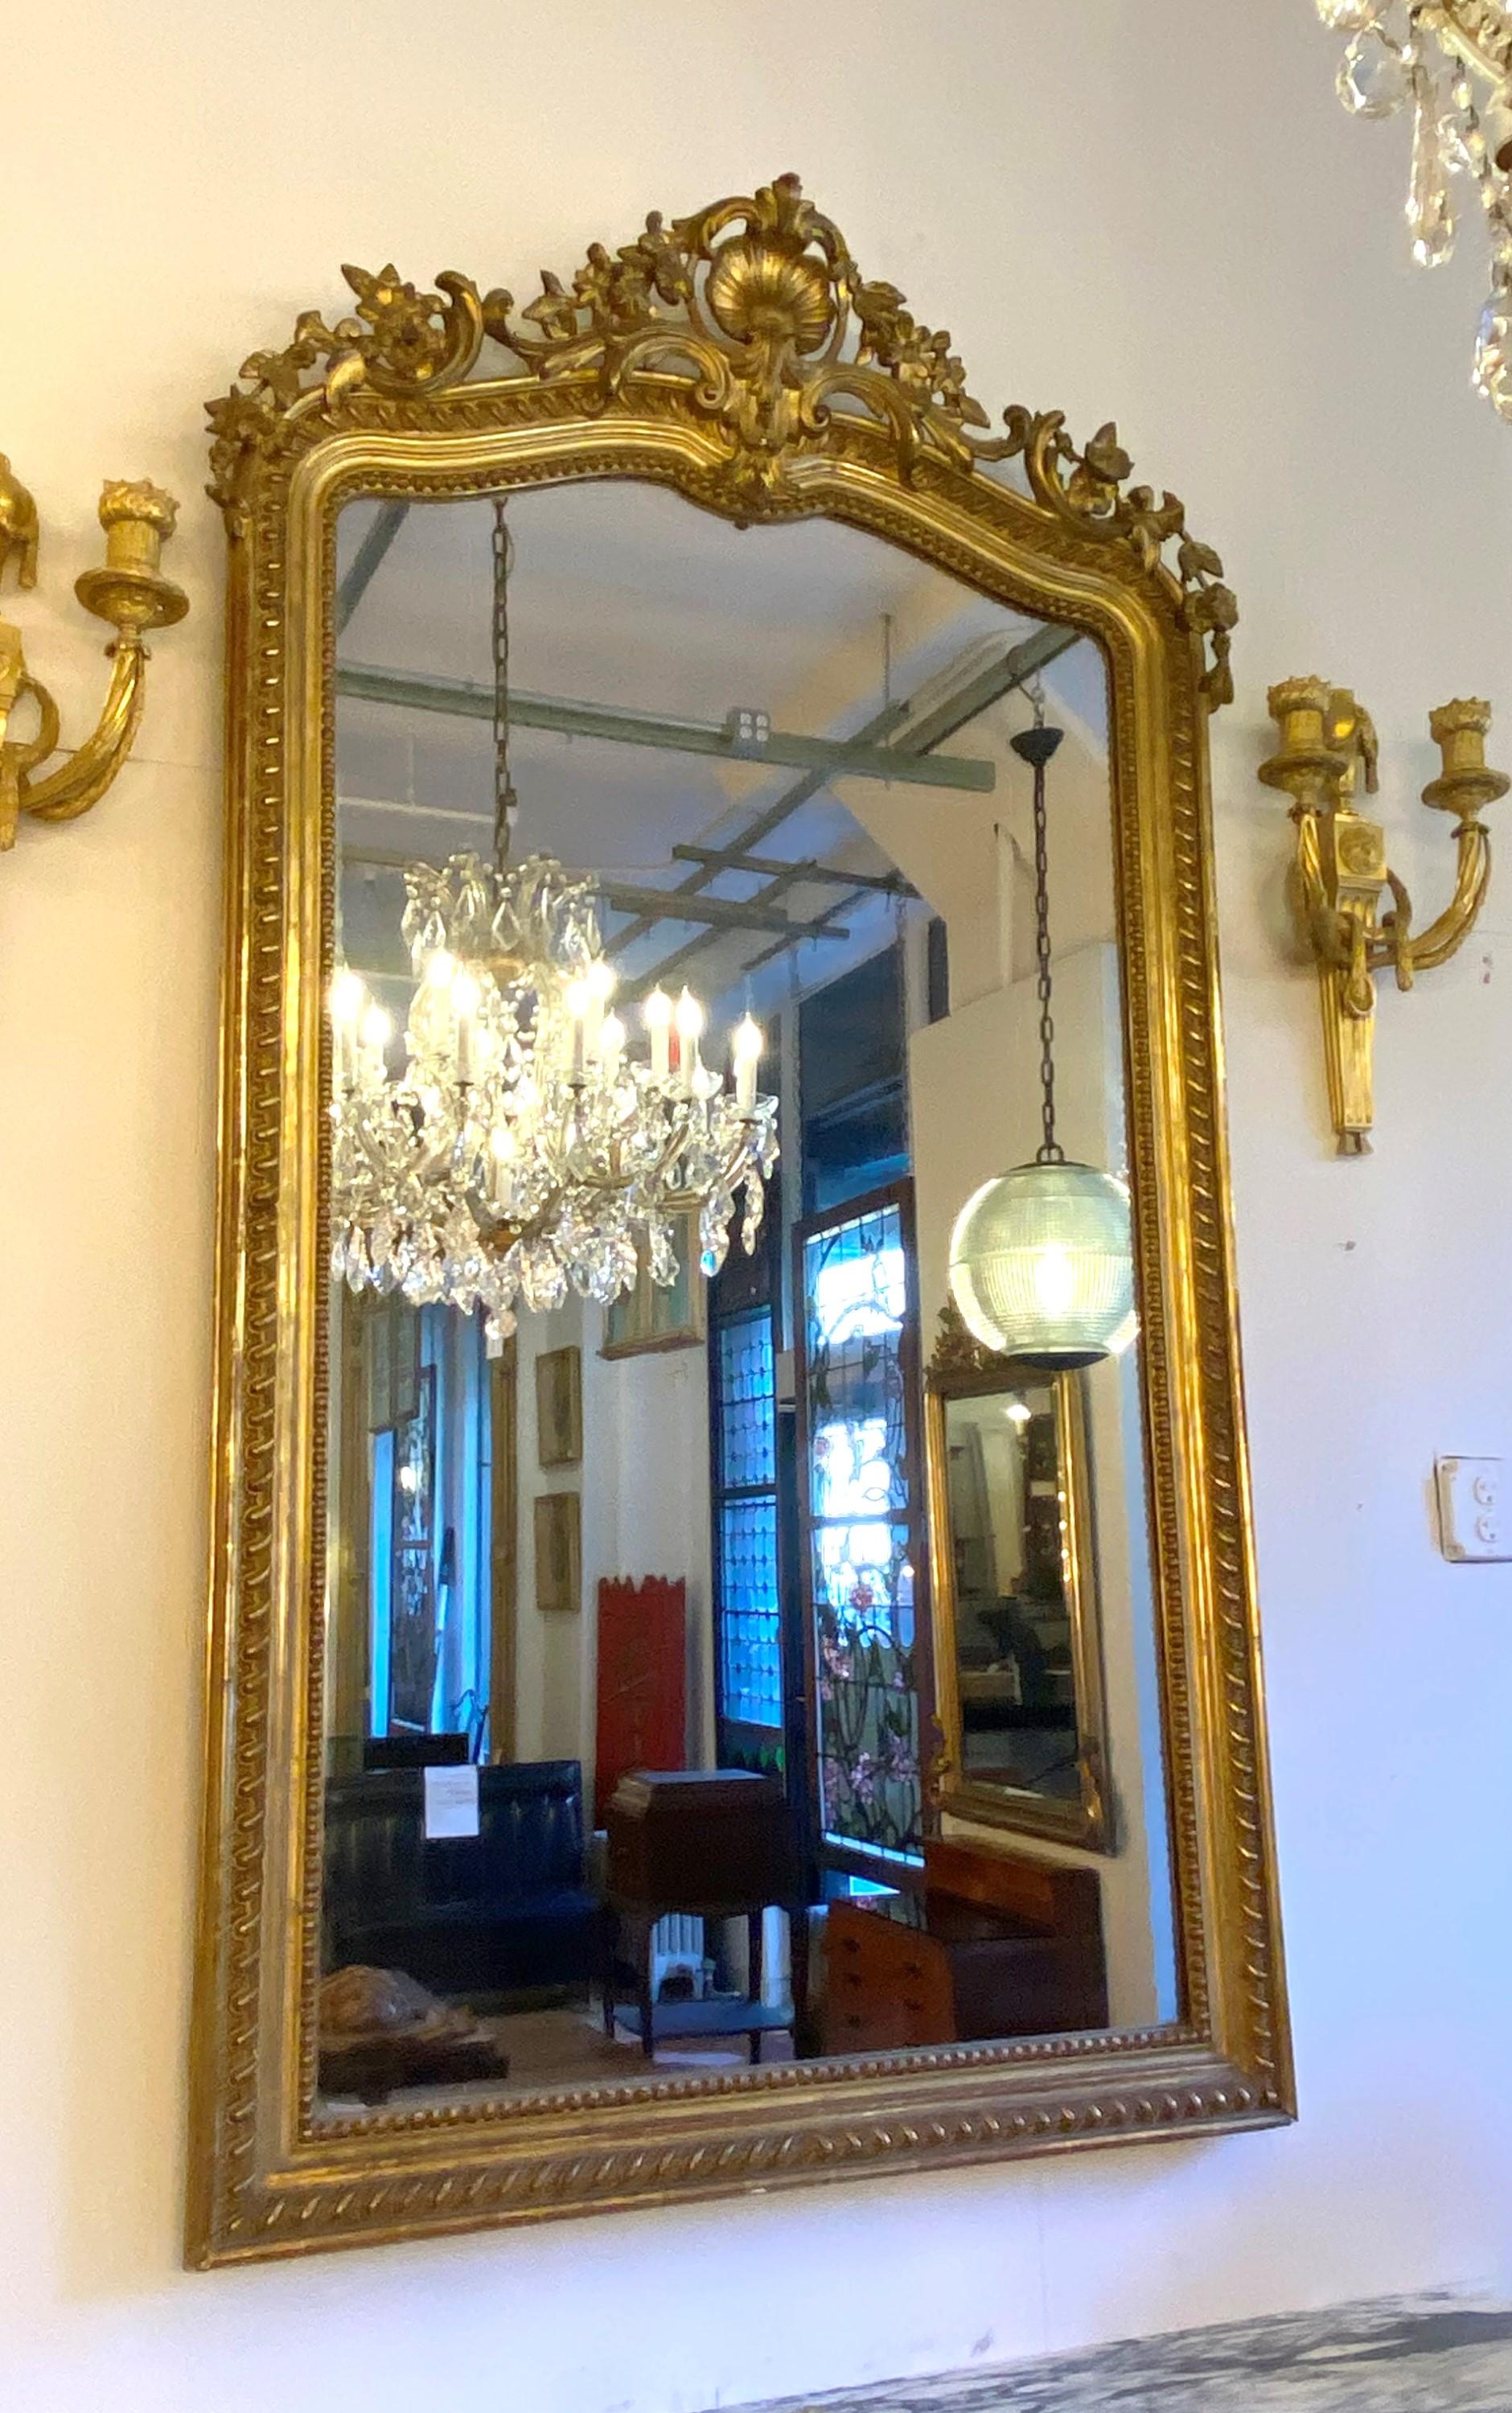 20th century Ornate antique French over mantel mirror. Gilt frame with hand carved wood and gesso. Design features shells, floral details, beads, flourishes and flowers. Please note, this item is located in one of our NYC locations.